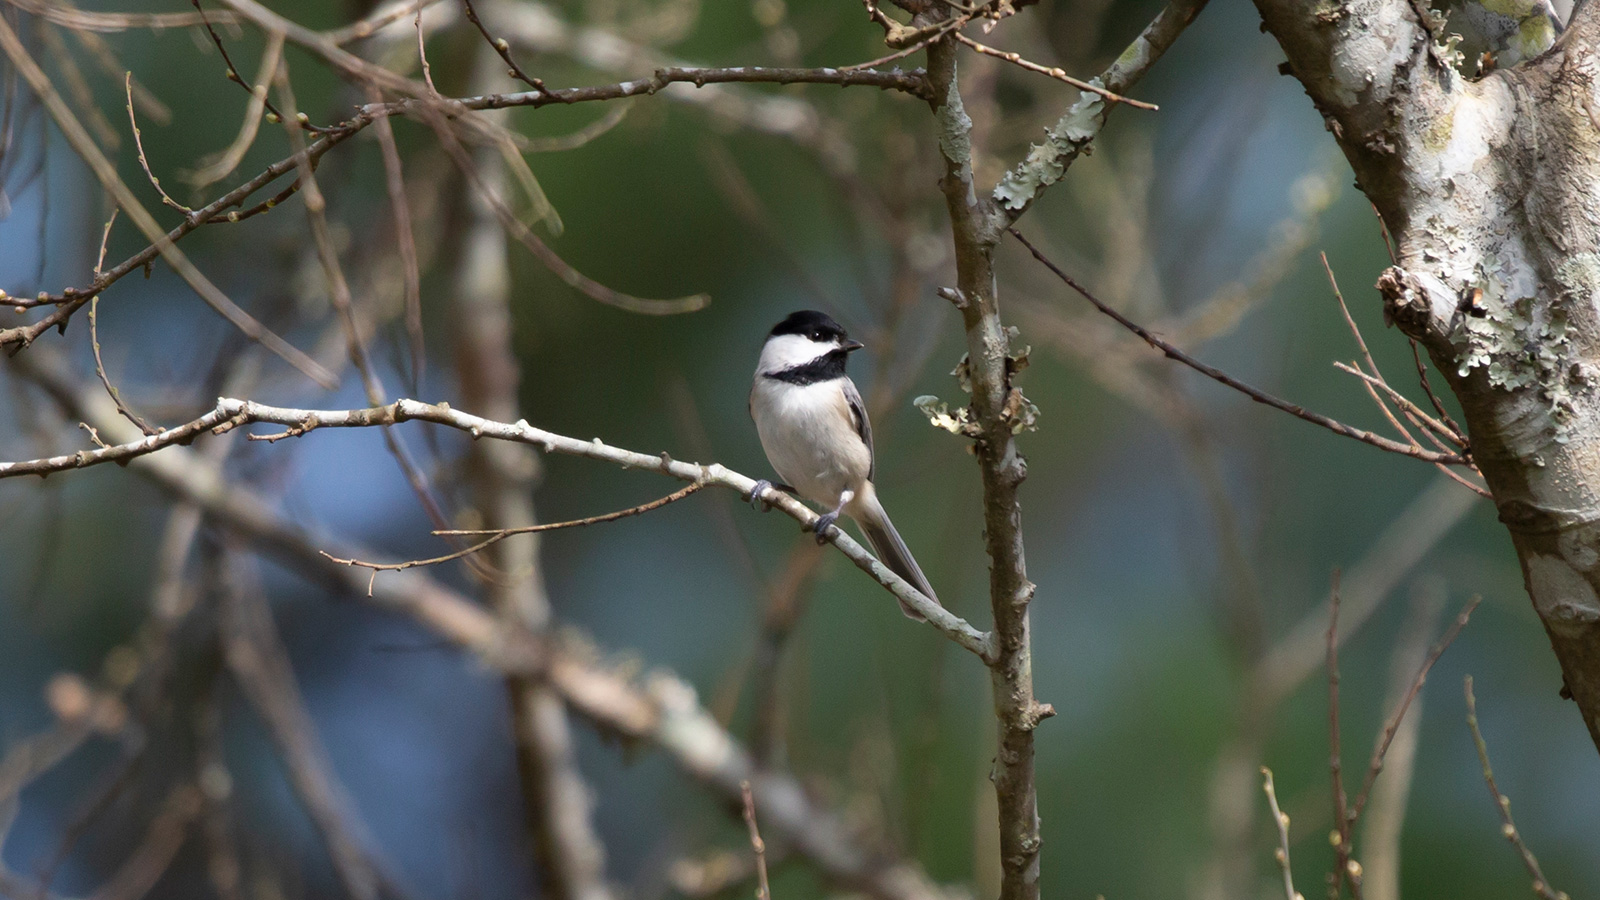 Carolina chickadee looking out from a tree branch